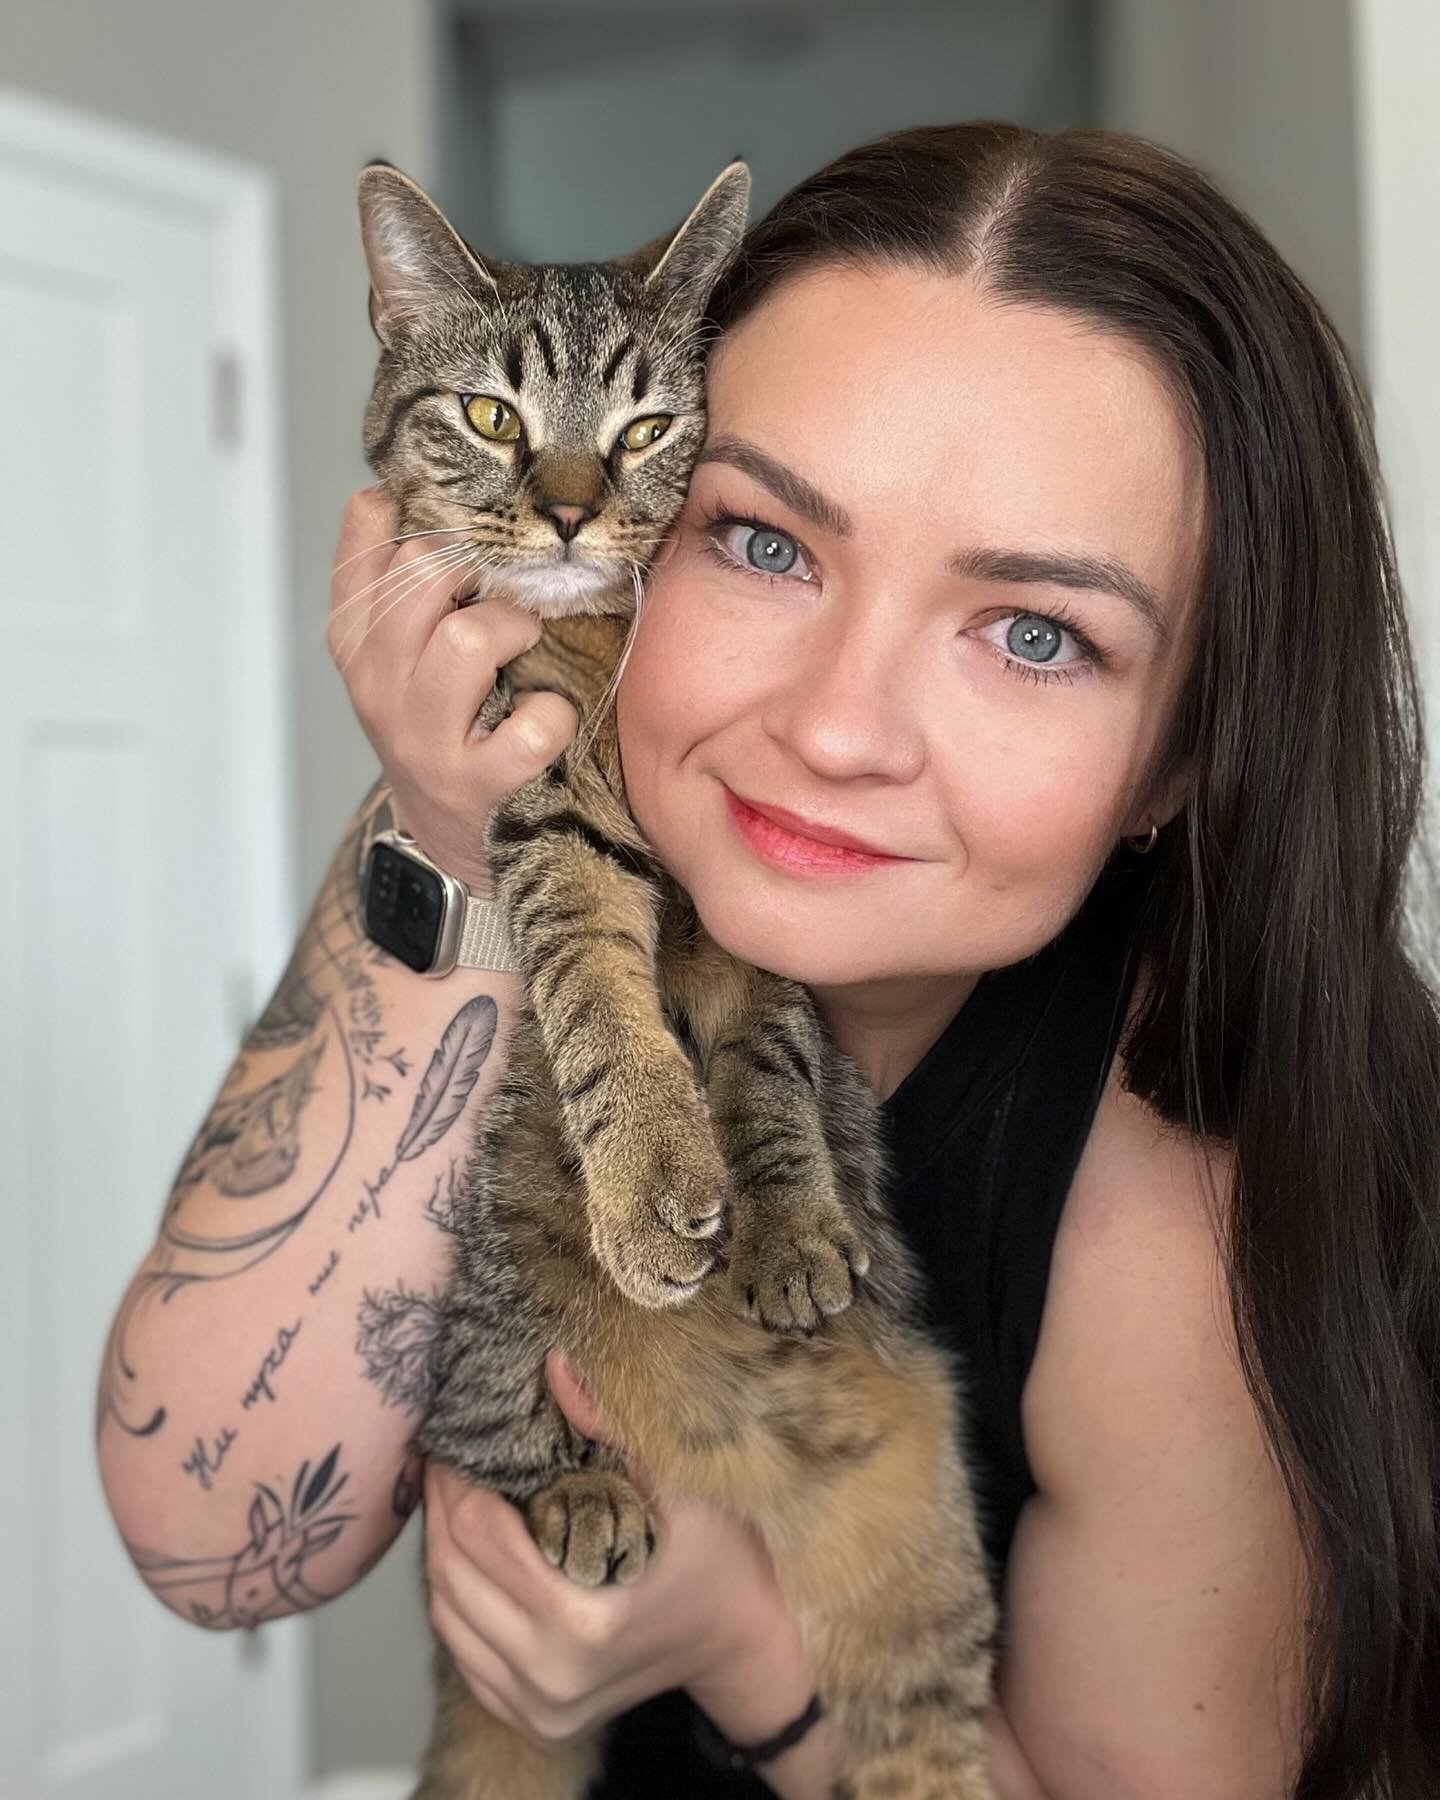 When you are trying to take cute photos with your cat, but she is absolutely not having it. #sideeye #catsofinstagram